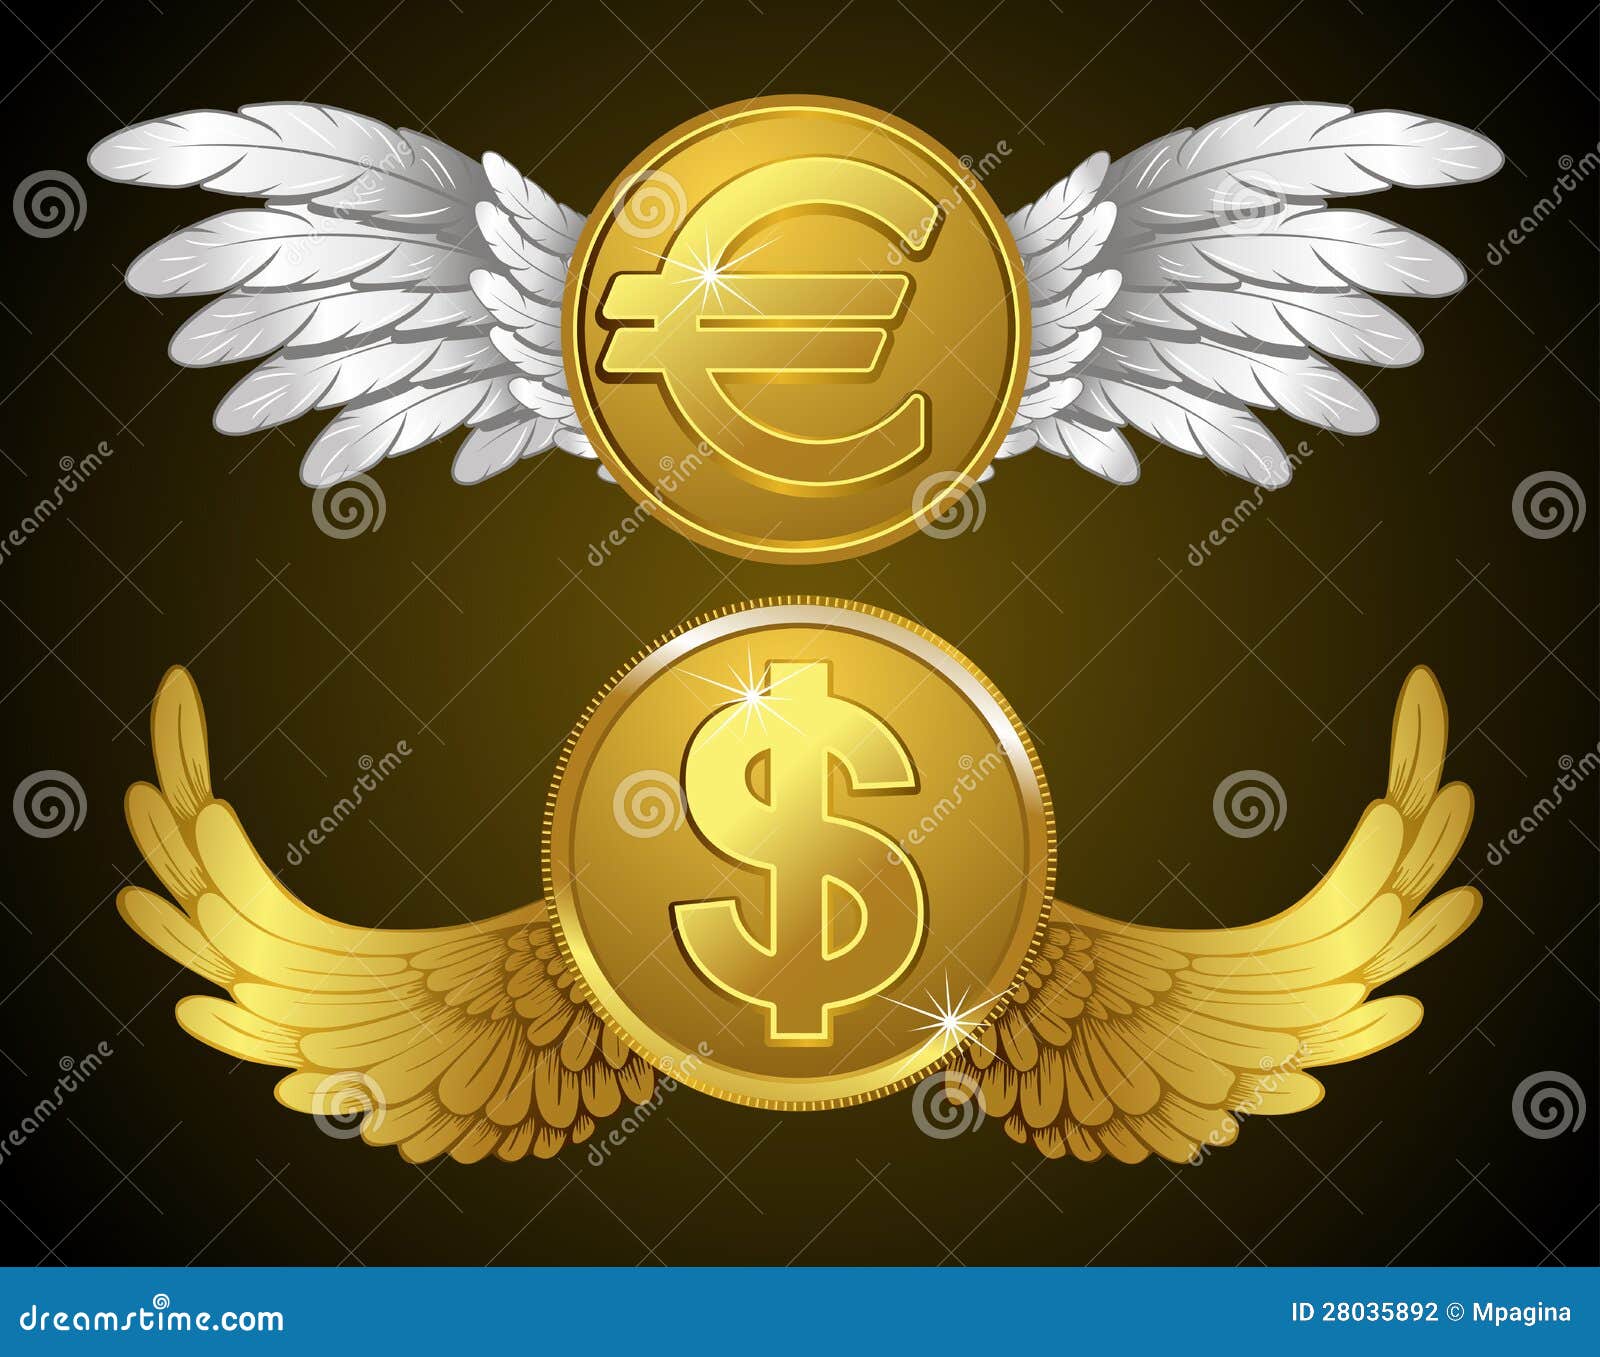 clipart money with wings - photo #29